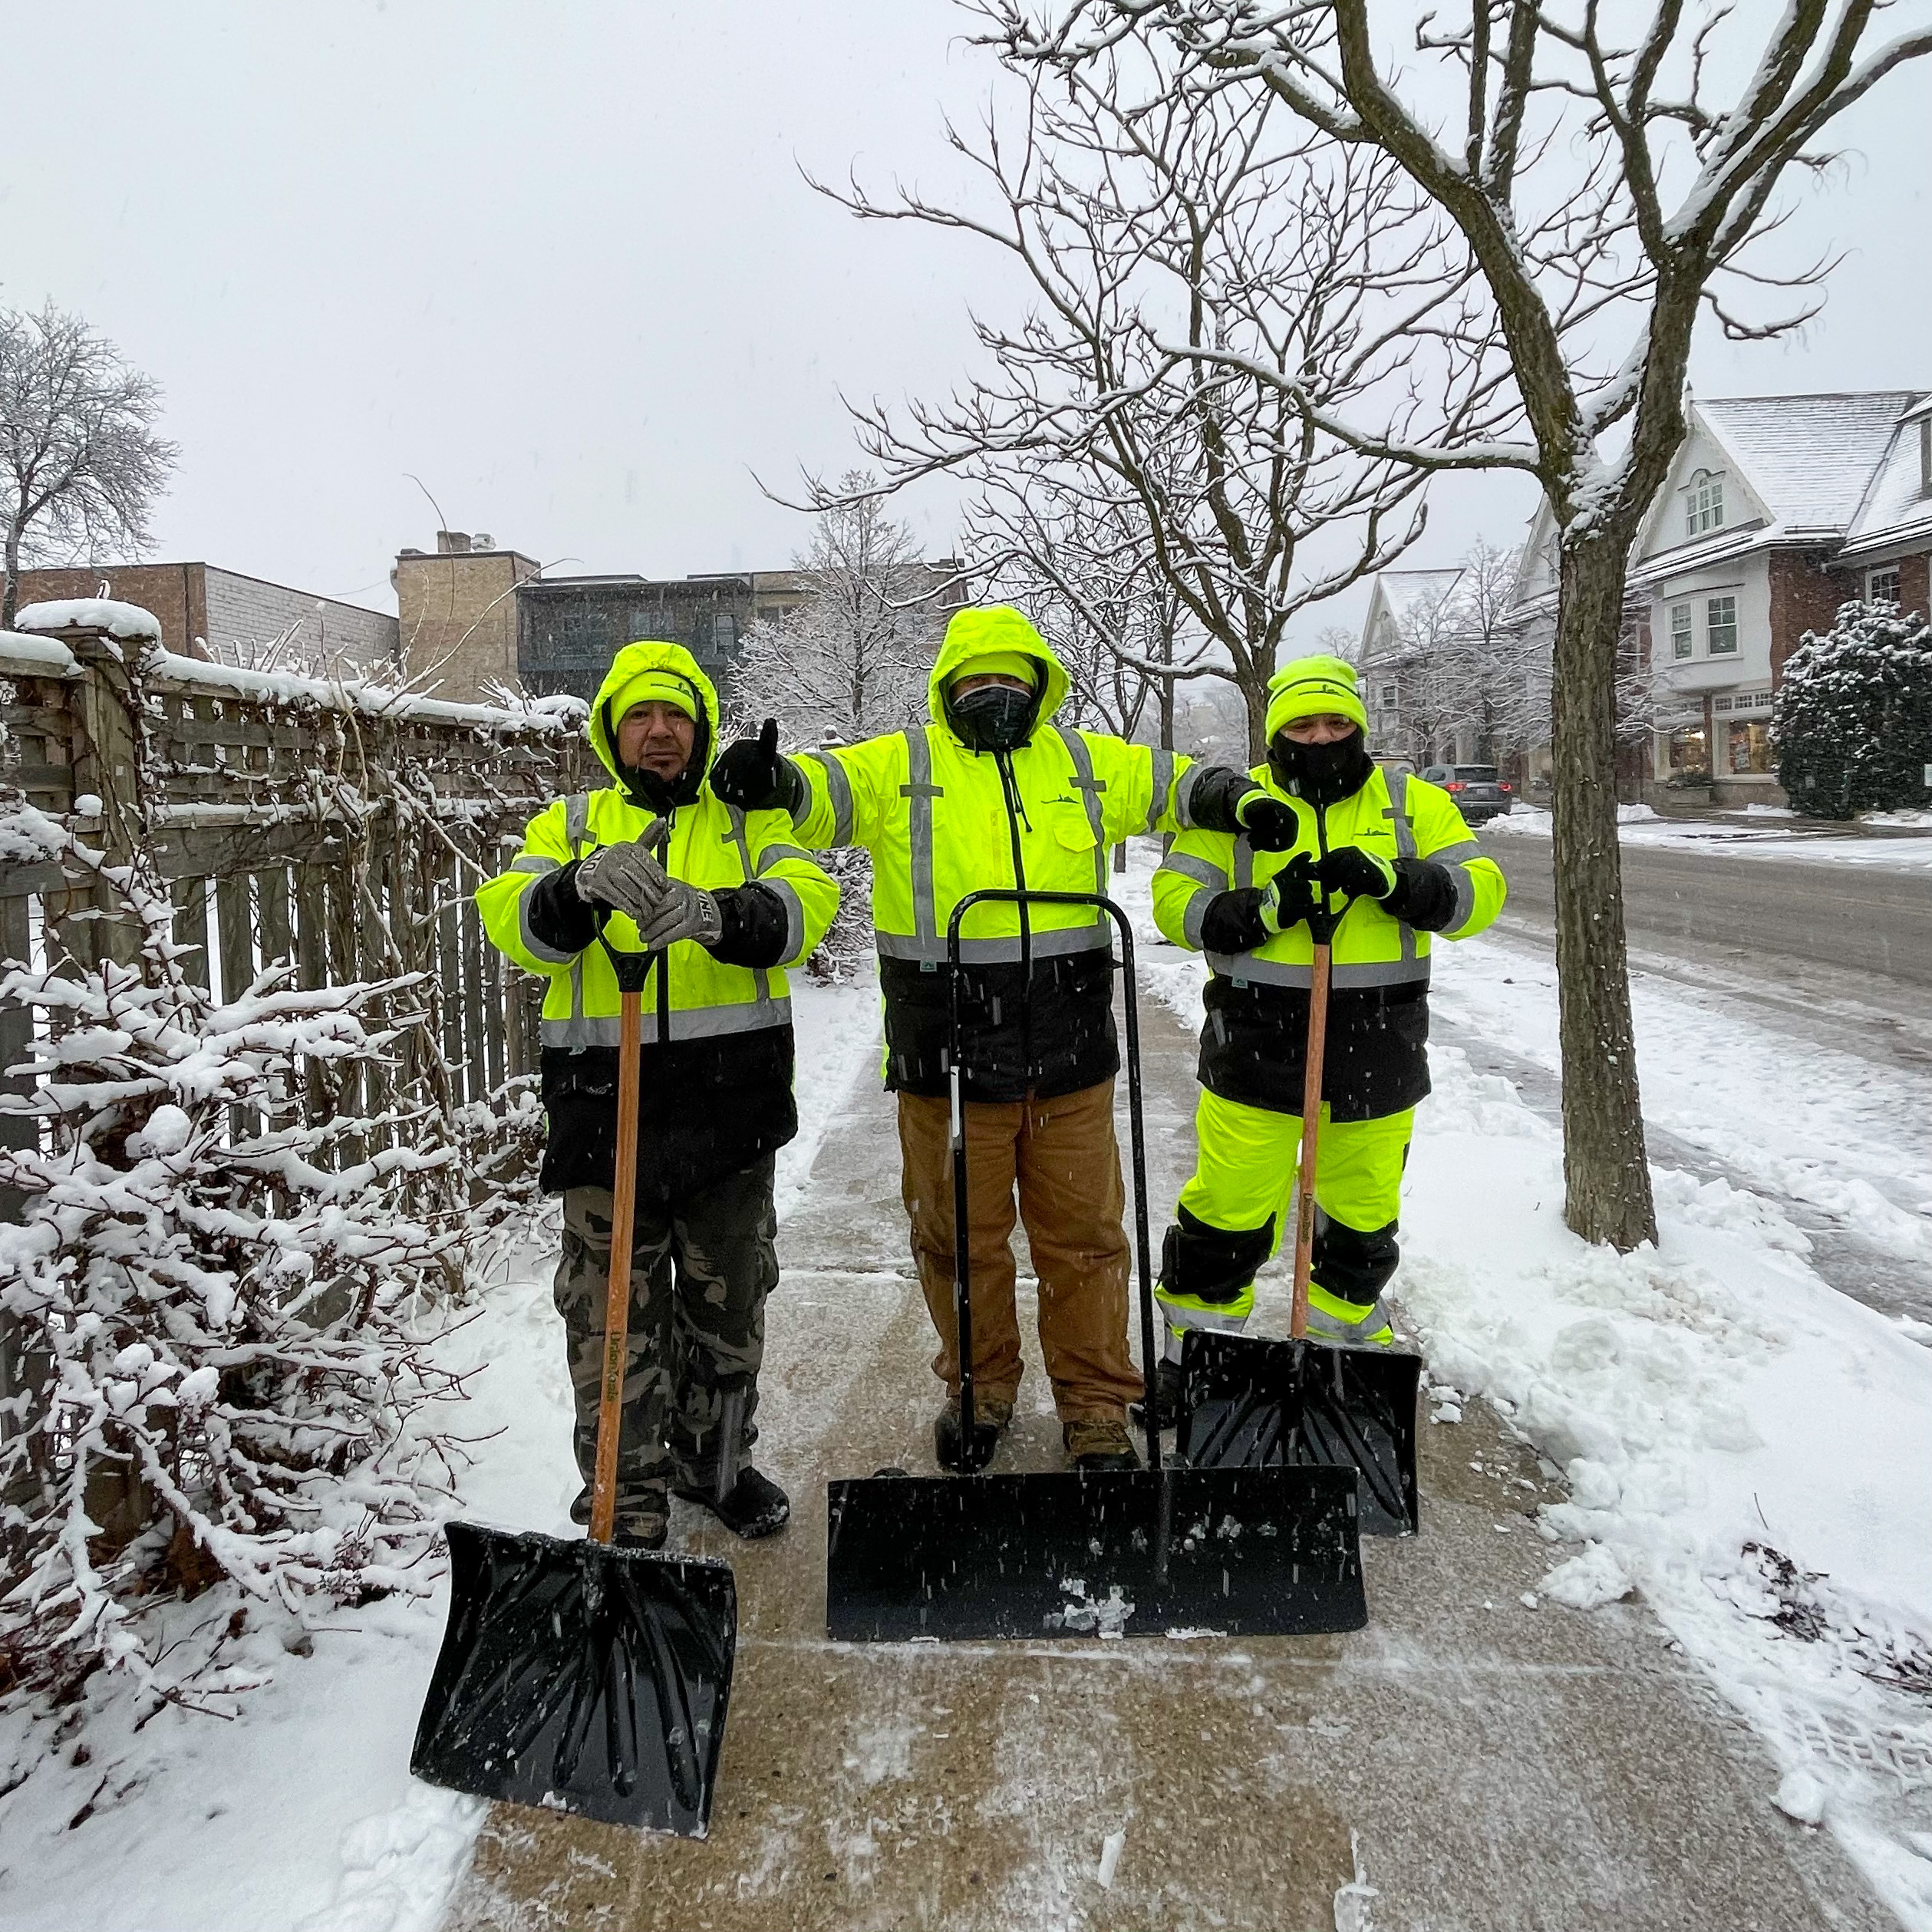 Three individuals in high-visibility jackets holding shovels on a snowy residential street.